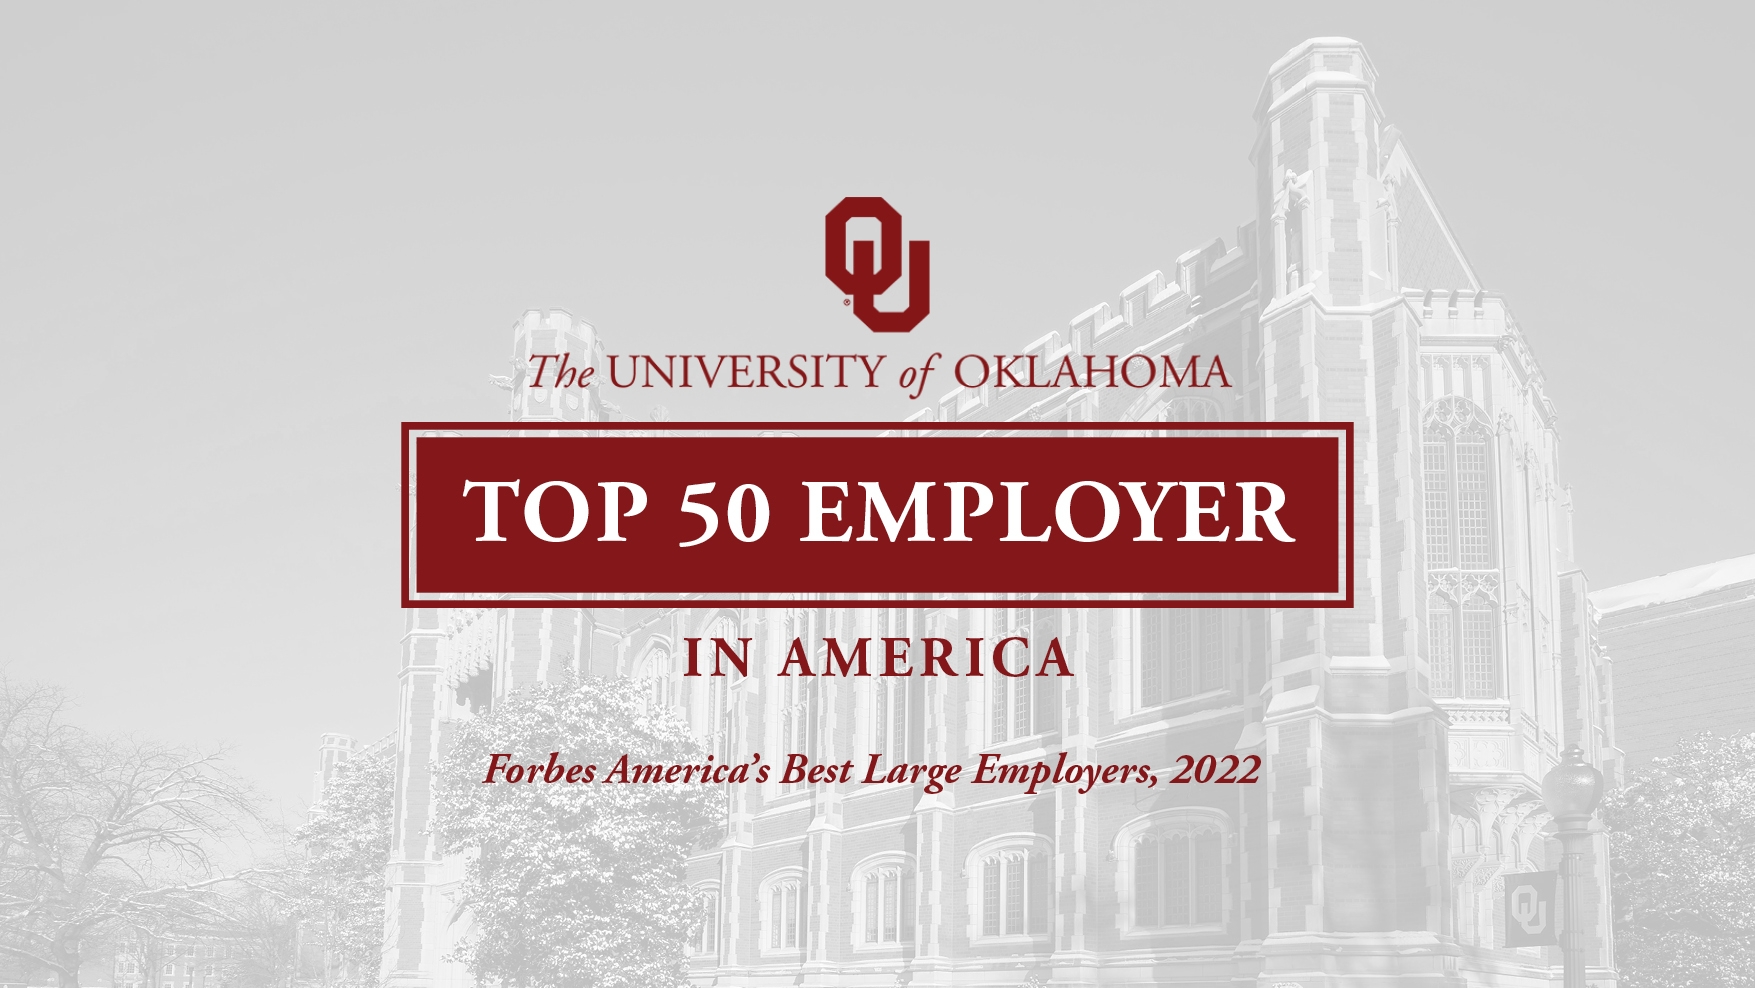 The University of Oklahoma, Top 50 Employer in America, Forbes America's Best Large Employers, 2022